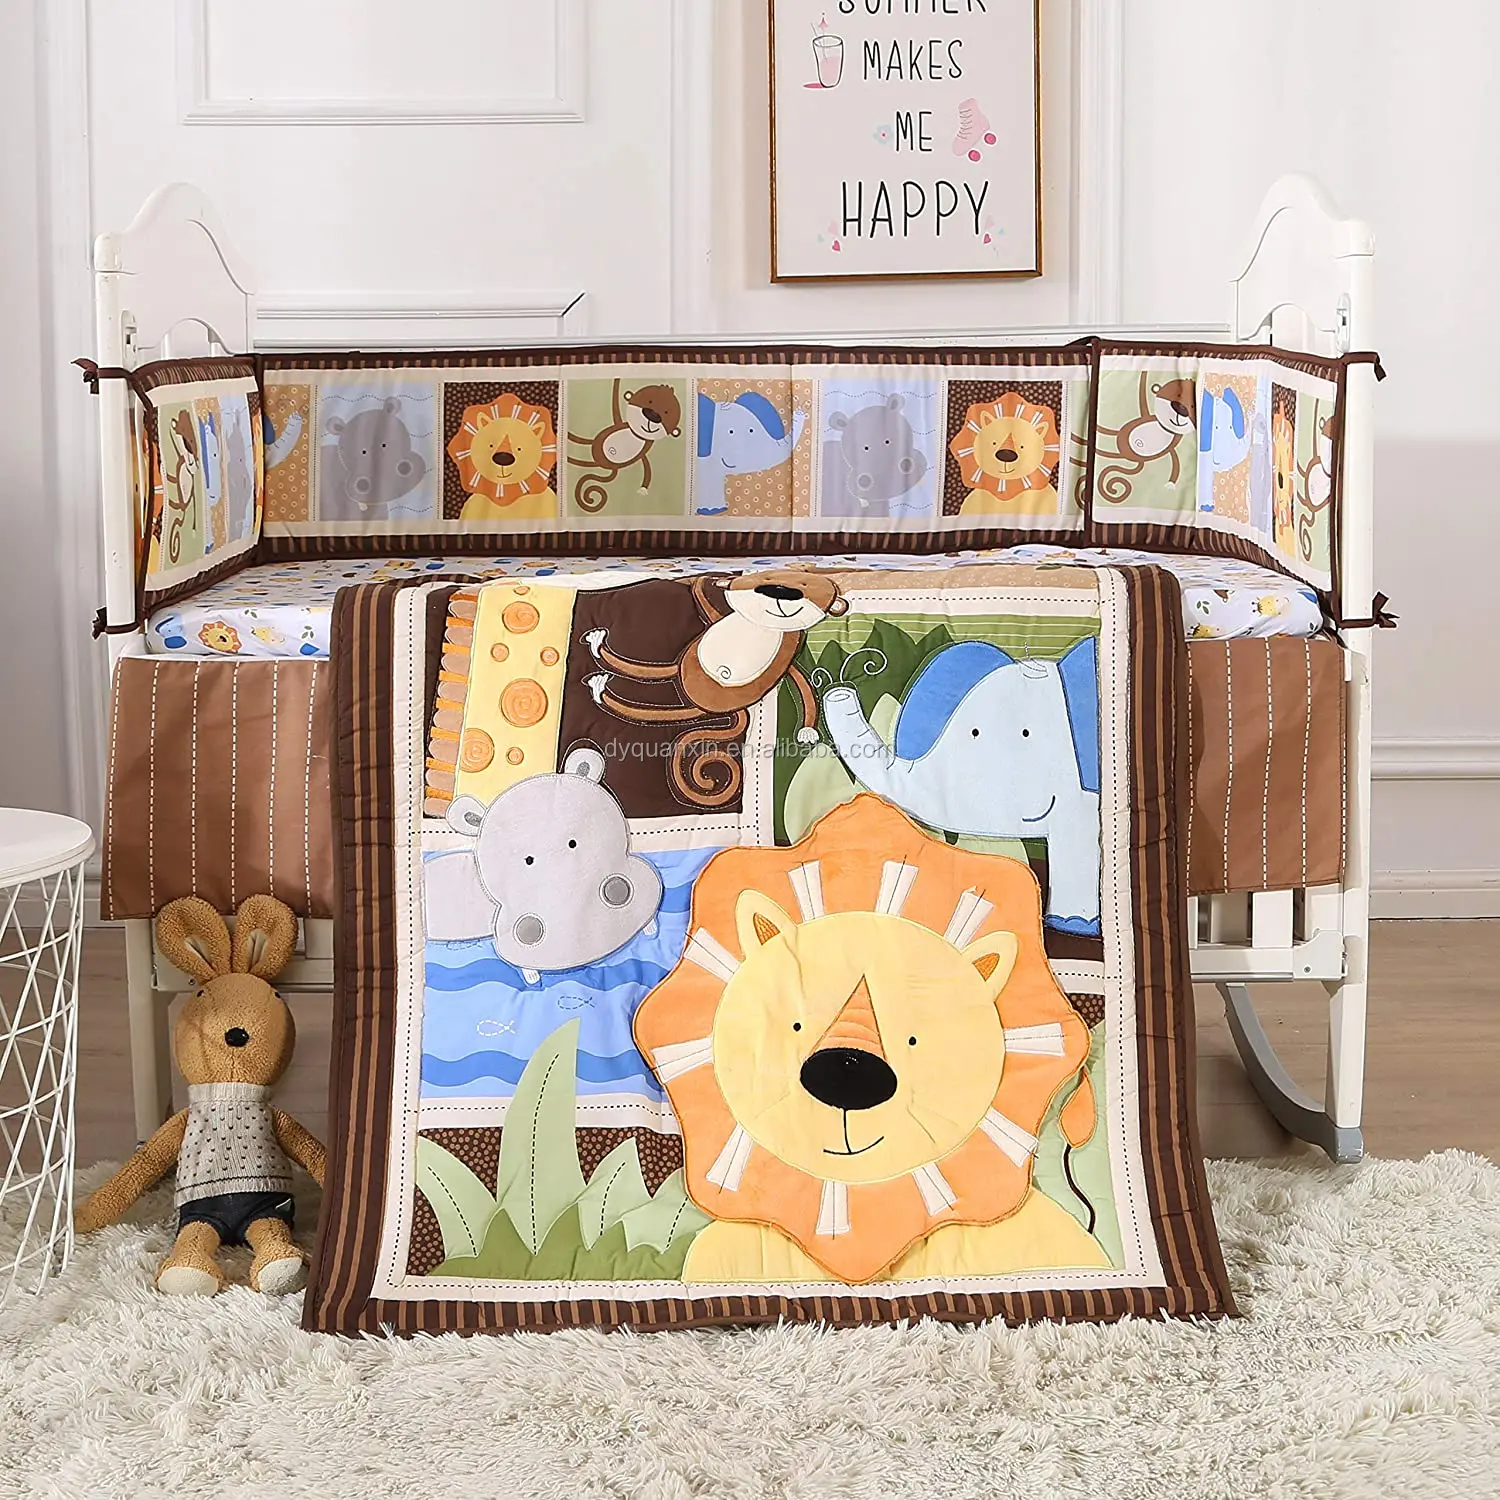 Fitted Sheet and Bed Skirt Baby Boy Bedding USTIDE 7-Piece Nursery Cot Bedding Set Cute Lion Crib Bedding with Bumper